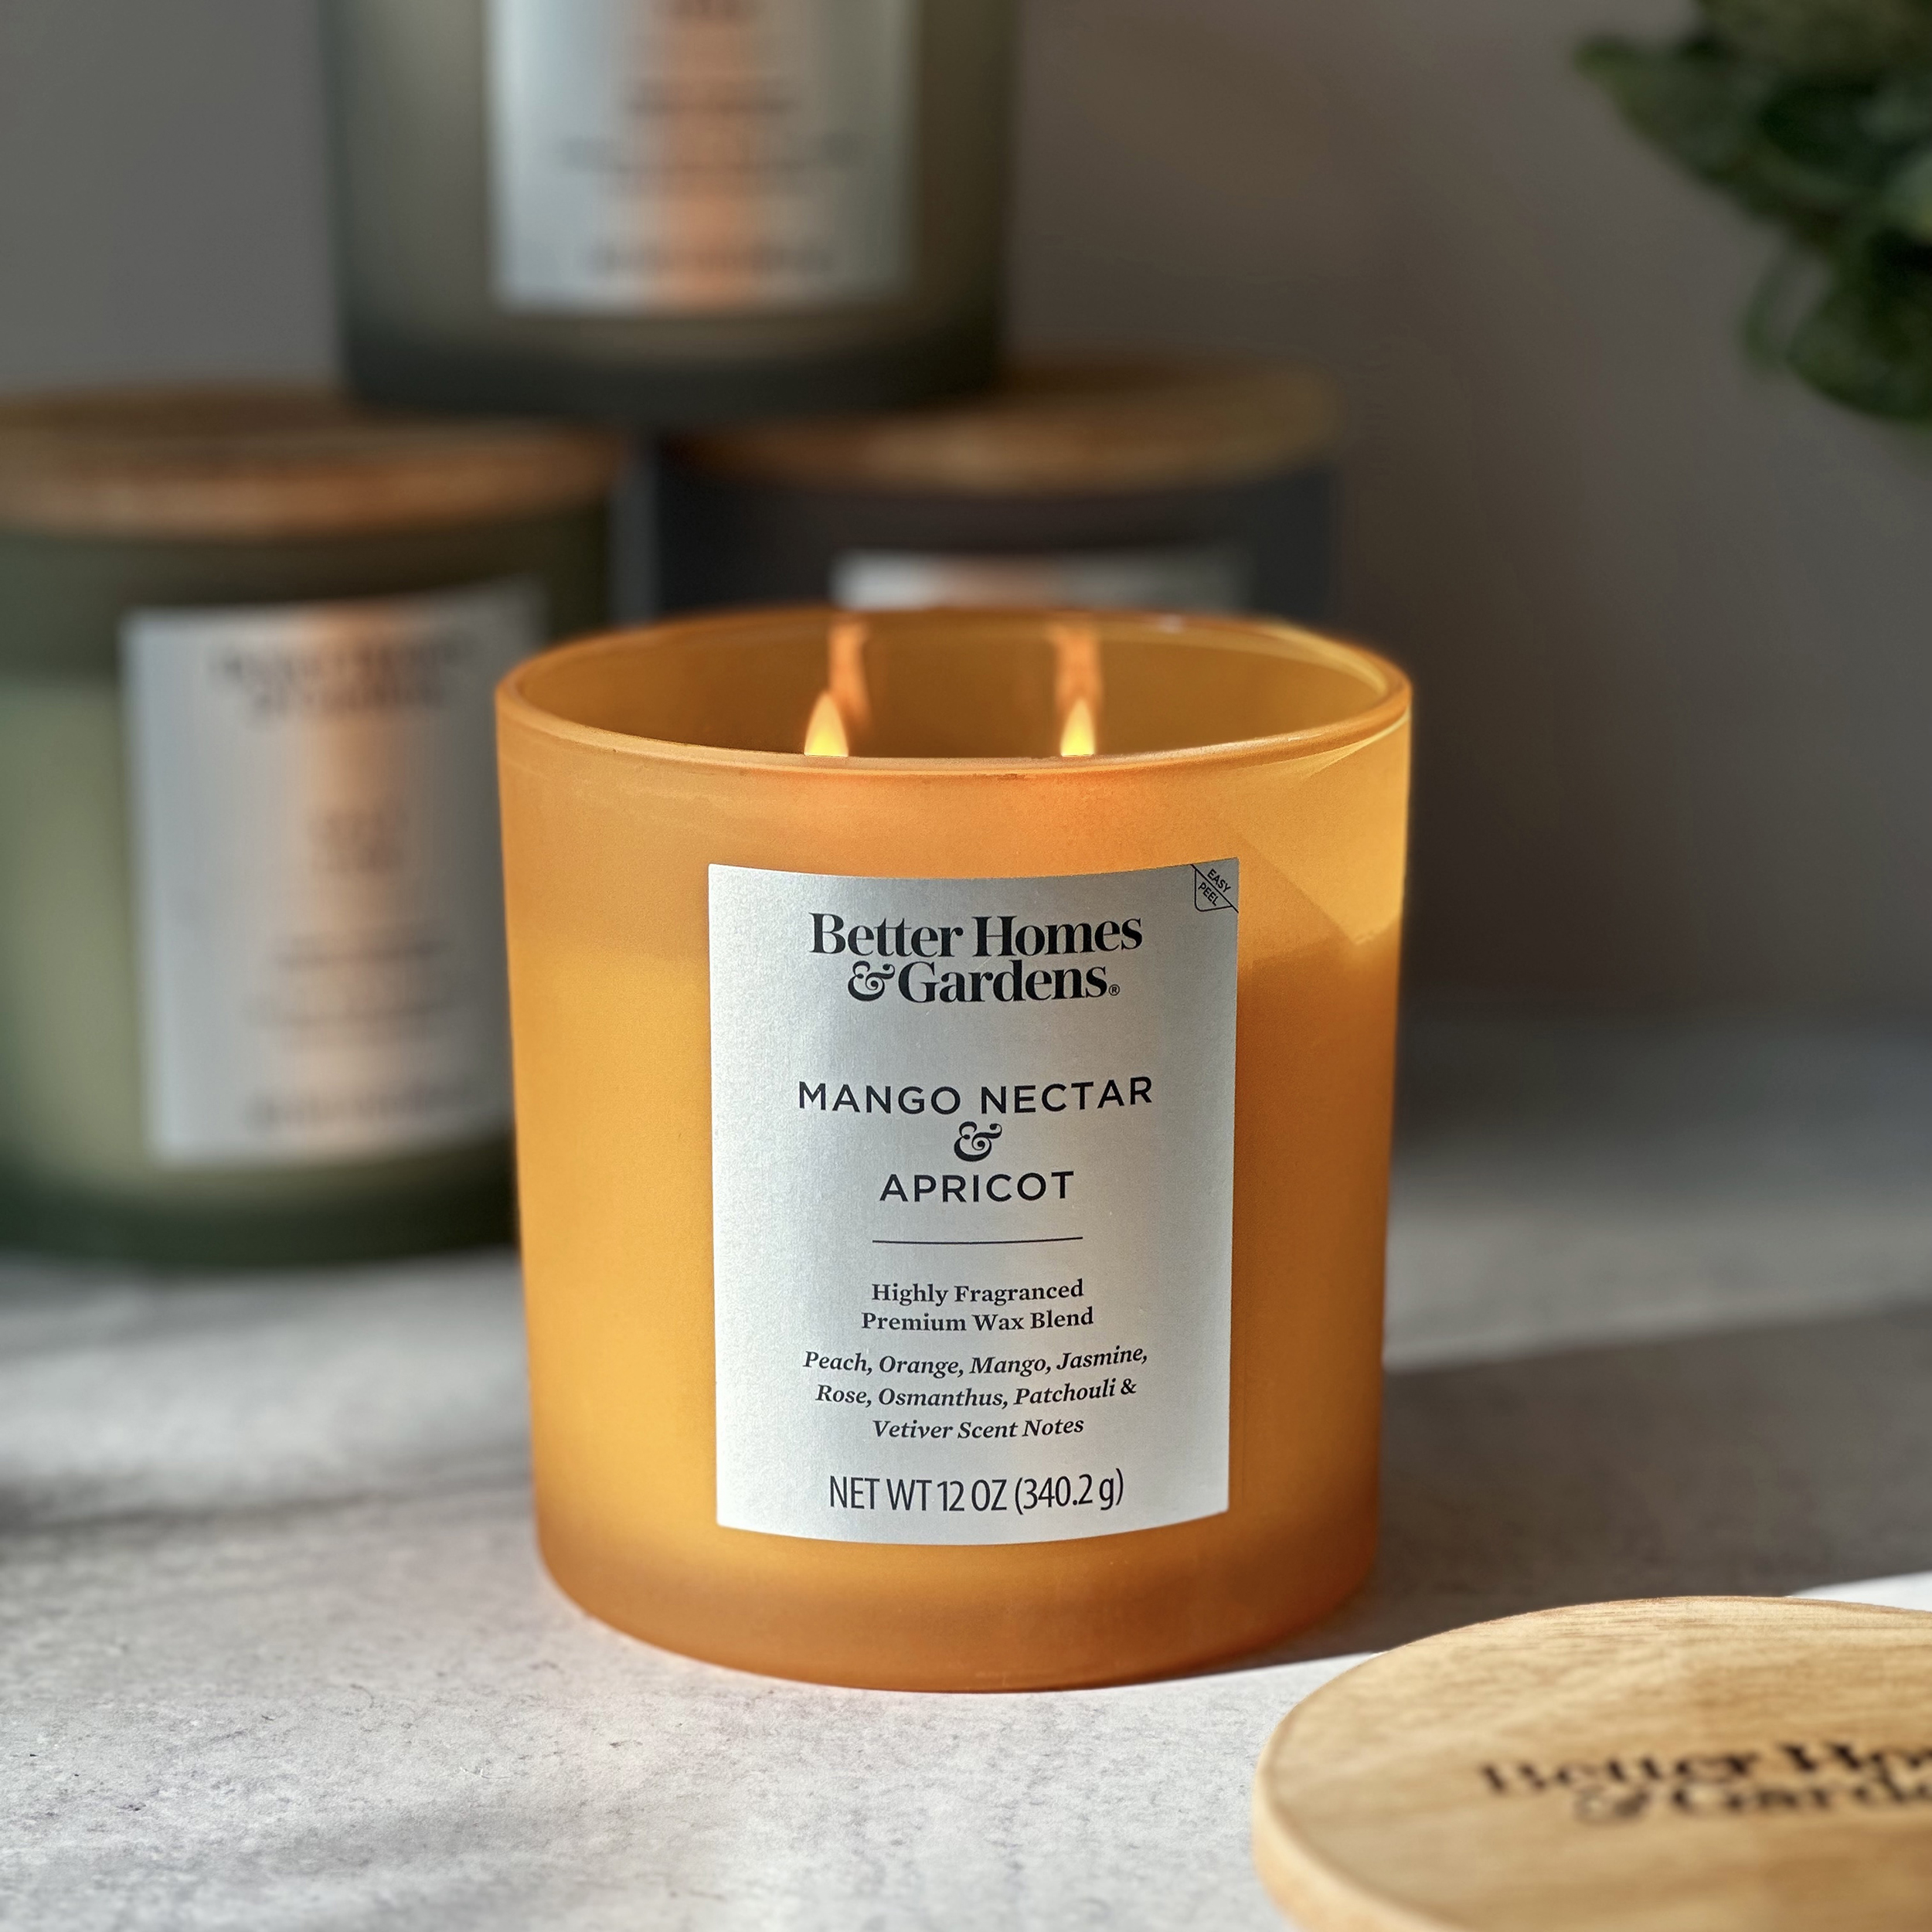 Better Homes & Gardens 12oz Mango Nectar & Apricot Scented 2-Wick Frosted Jar Candle - image 4 of 5